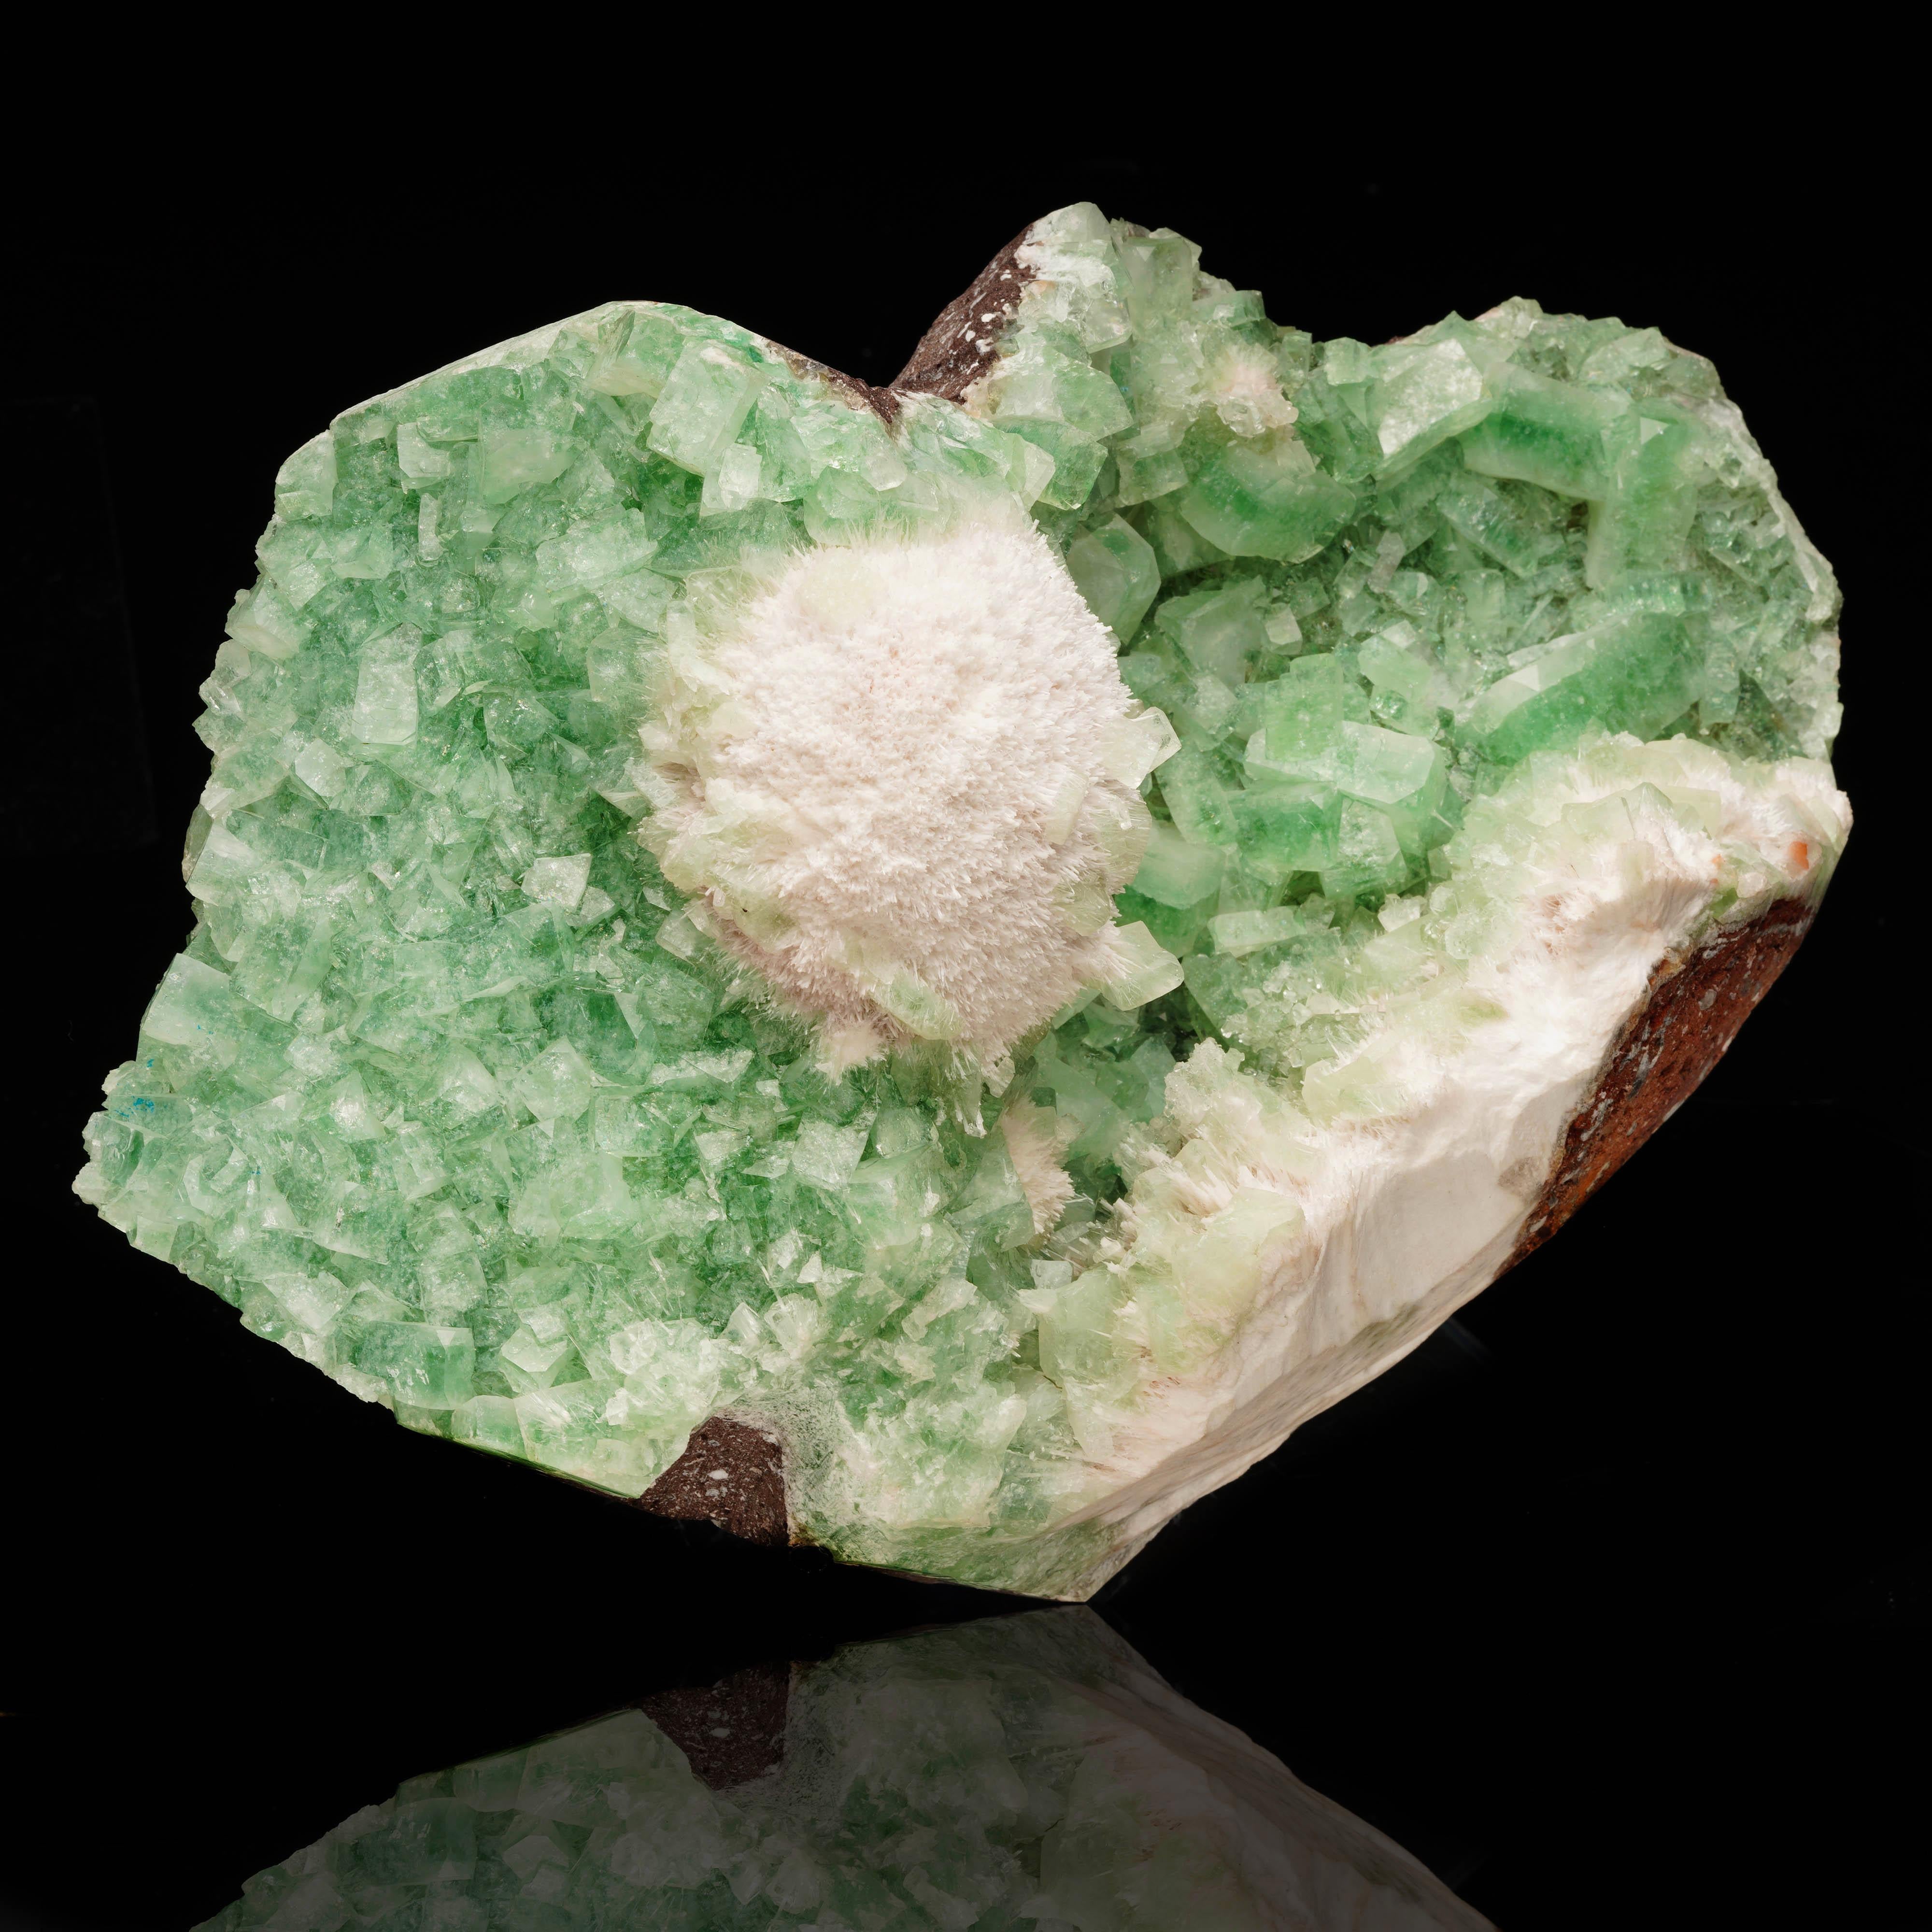 This gorgeous, lustrous, large cabinet size specimen from India features a snowball-like puff of the zeolite mineral mordenite perfectly accenting a swathe of richly pigmented nearly mint-green large, fully formed green gem apophyllite crystals.